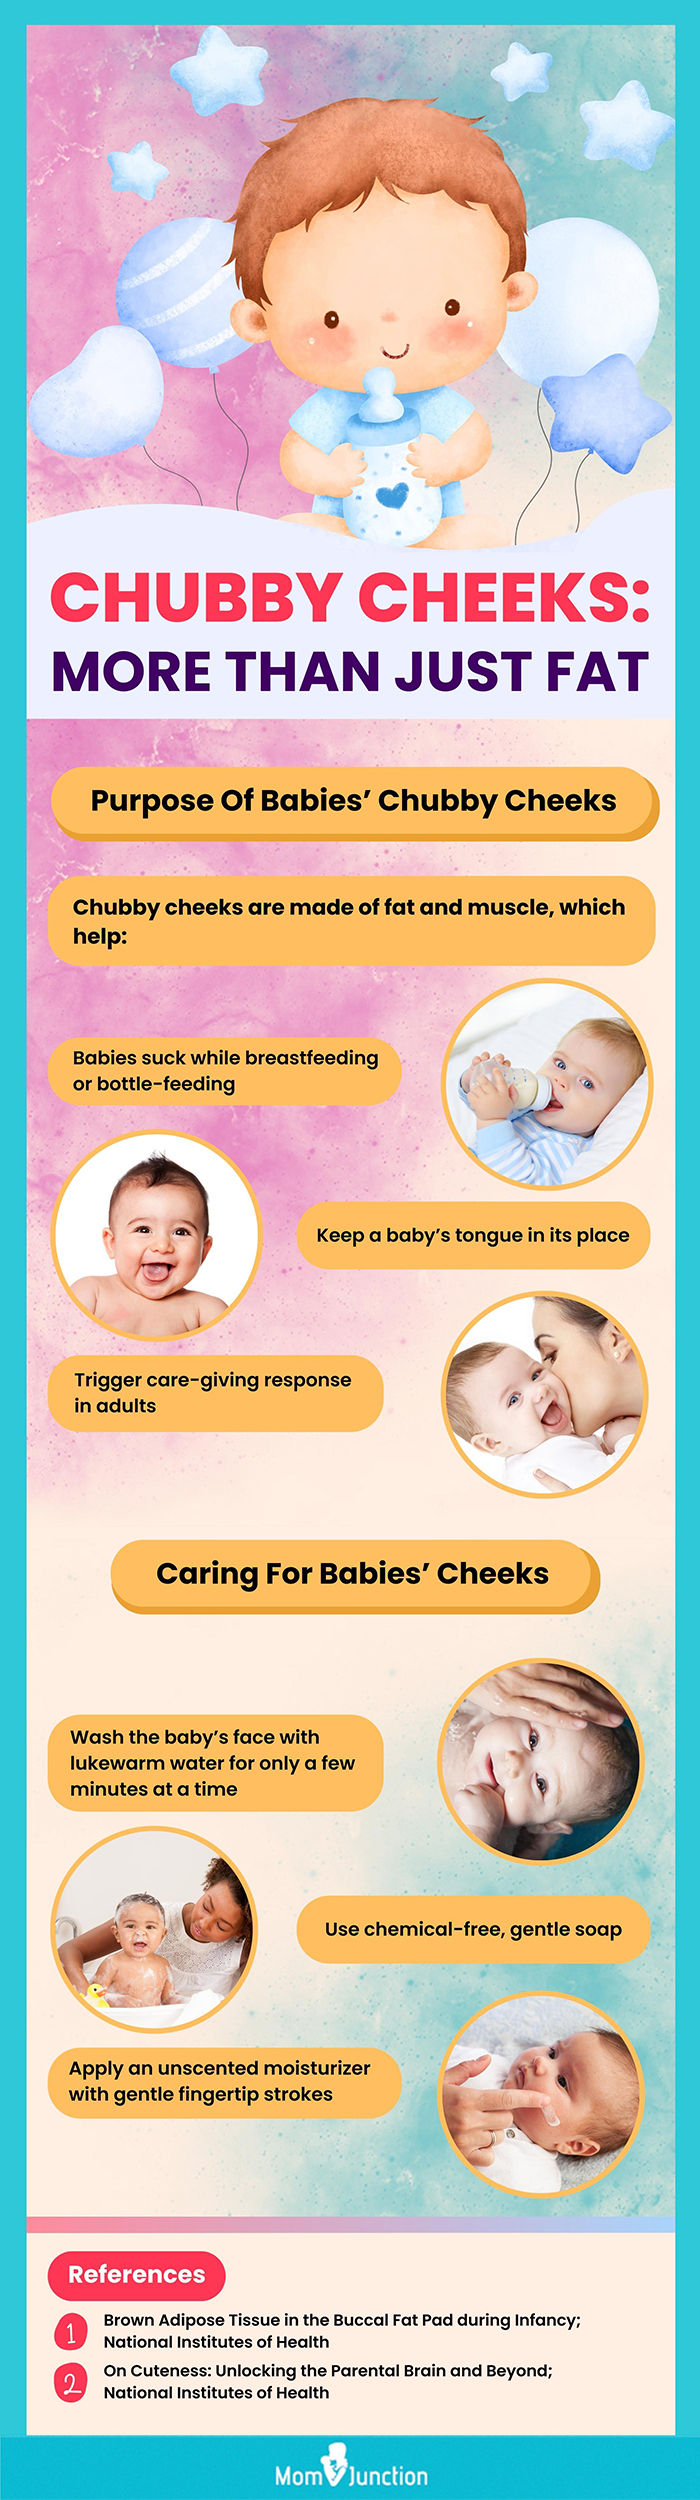 reasons behind baby’s chubby cheeks [infographic]